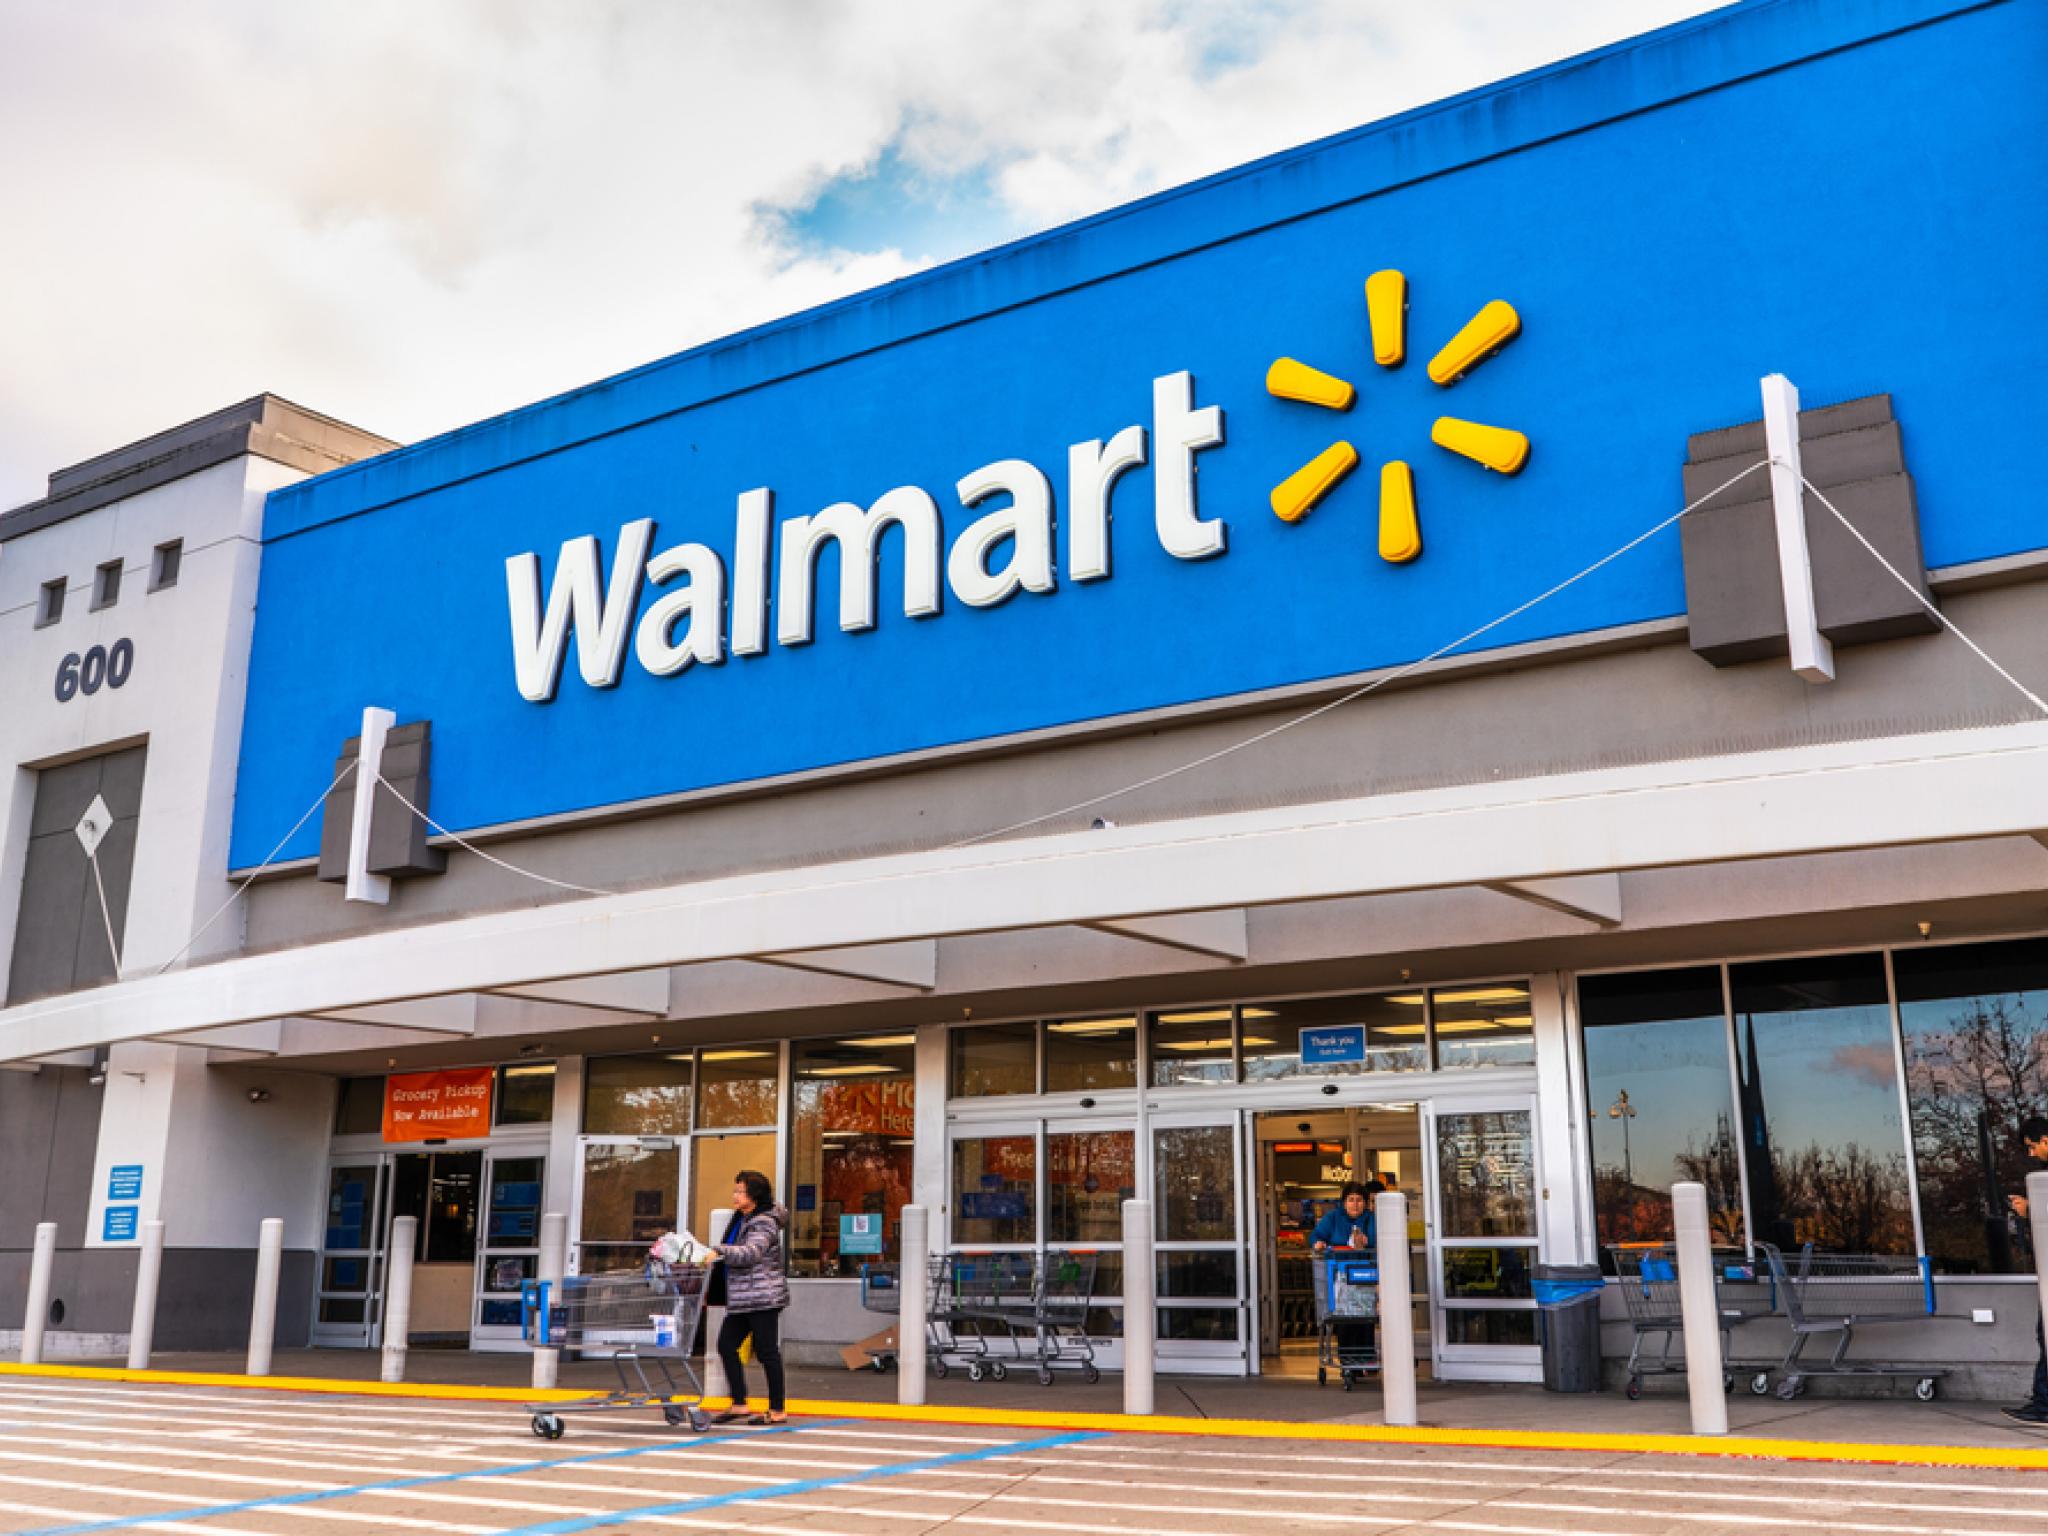  walmarts-q1-beat-likely-to-drive-positive-reaction-in-the-stock-says-analyst 